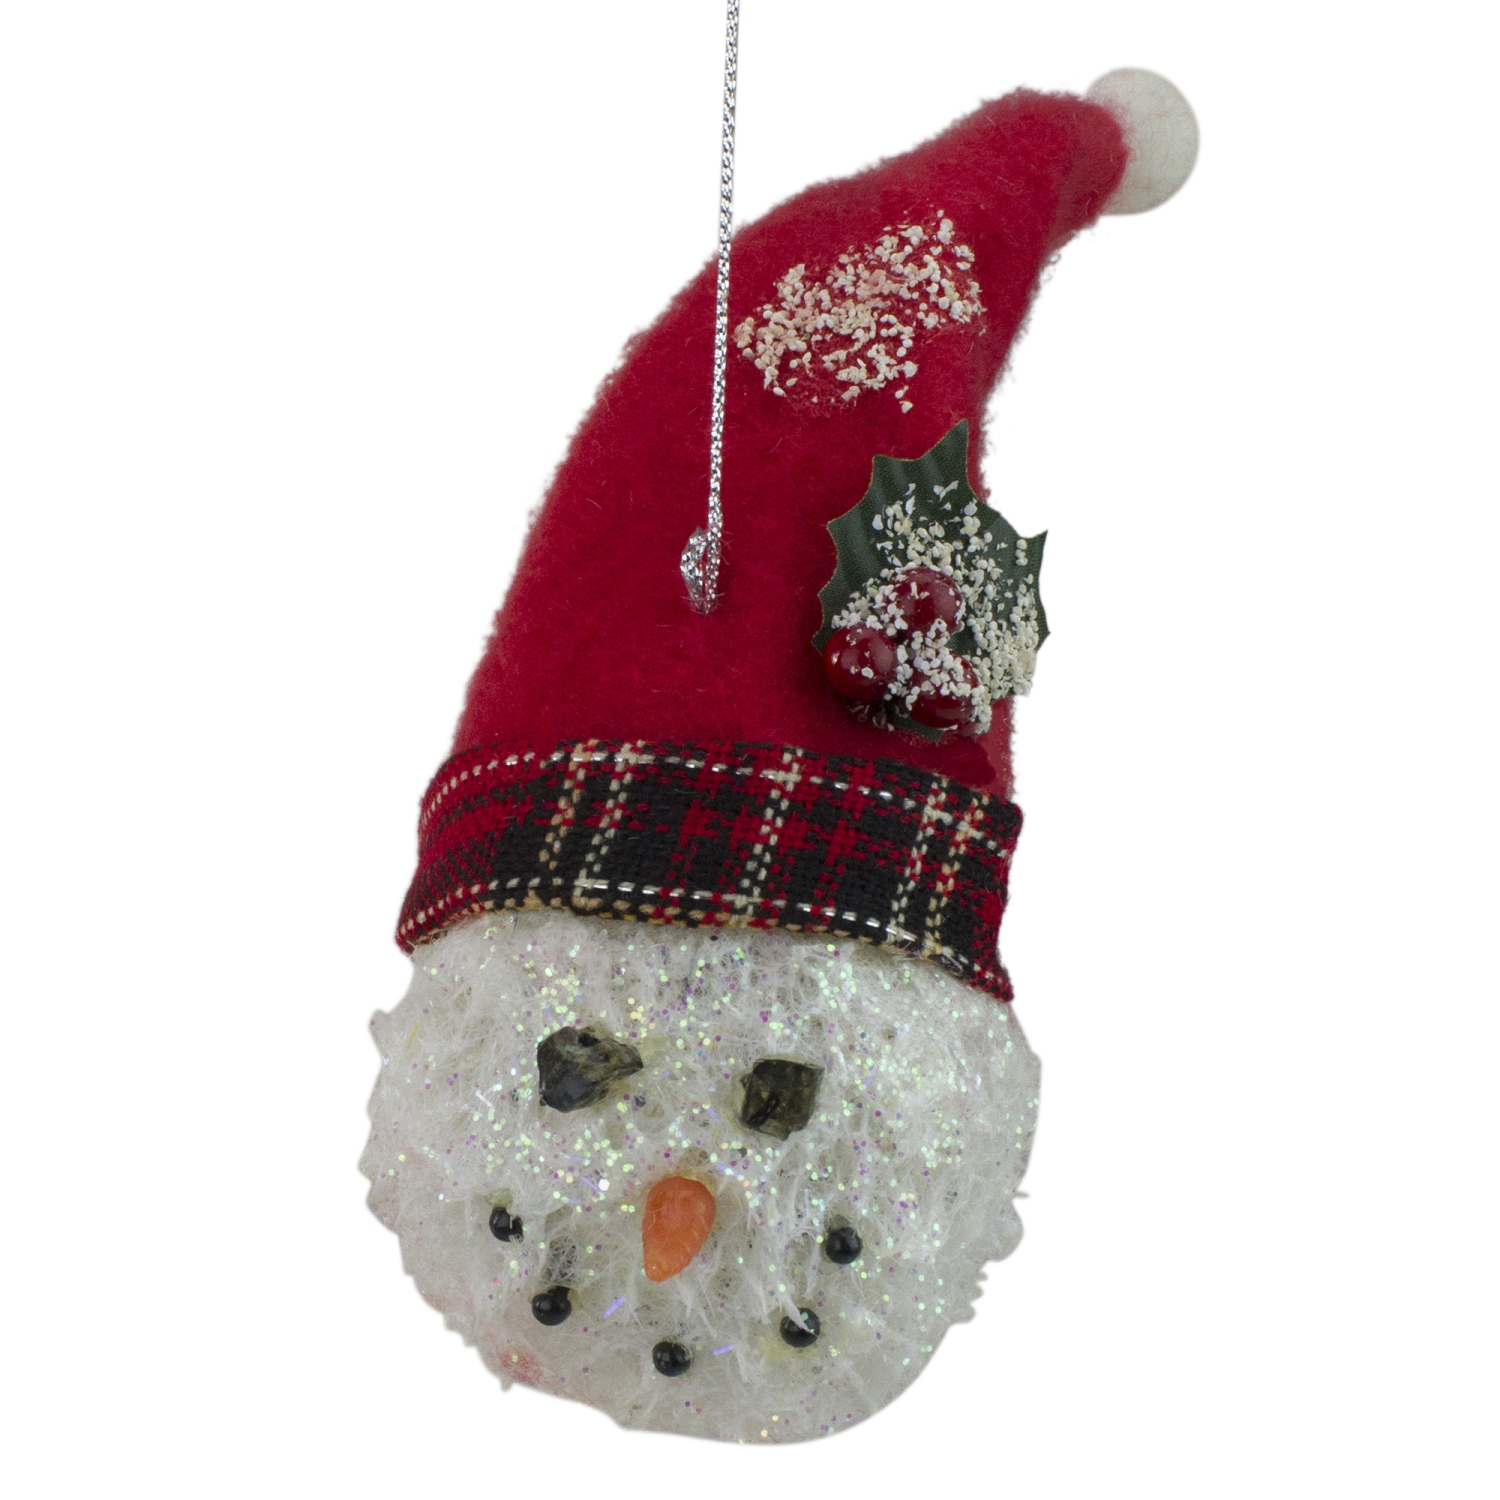 'Twas the Night Snowman Head with Plaid Hat Christmas Ornament